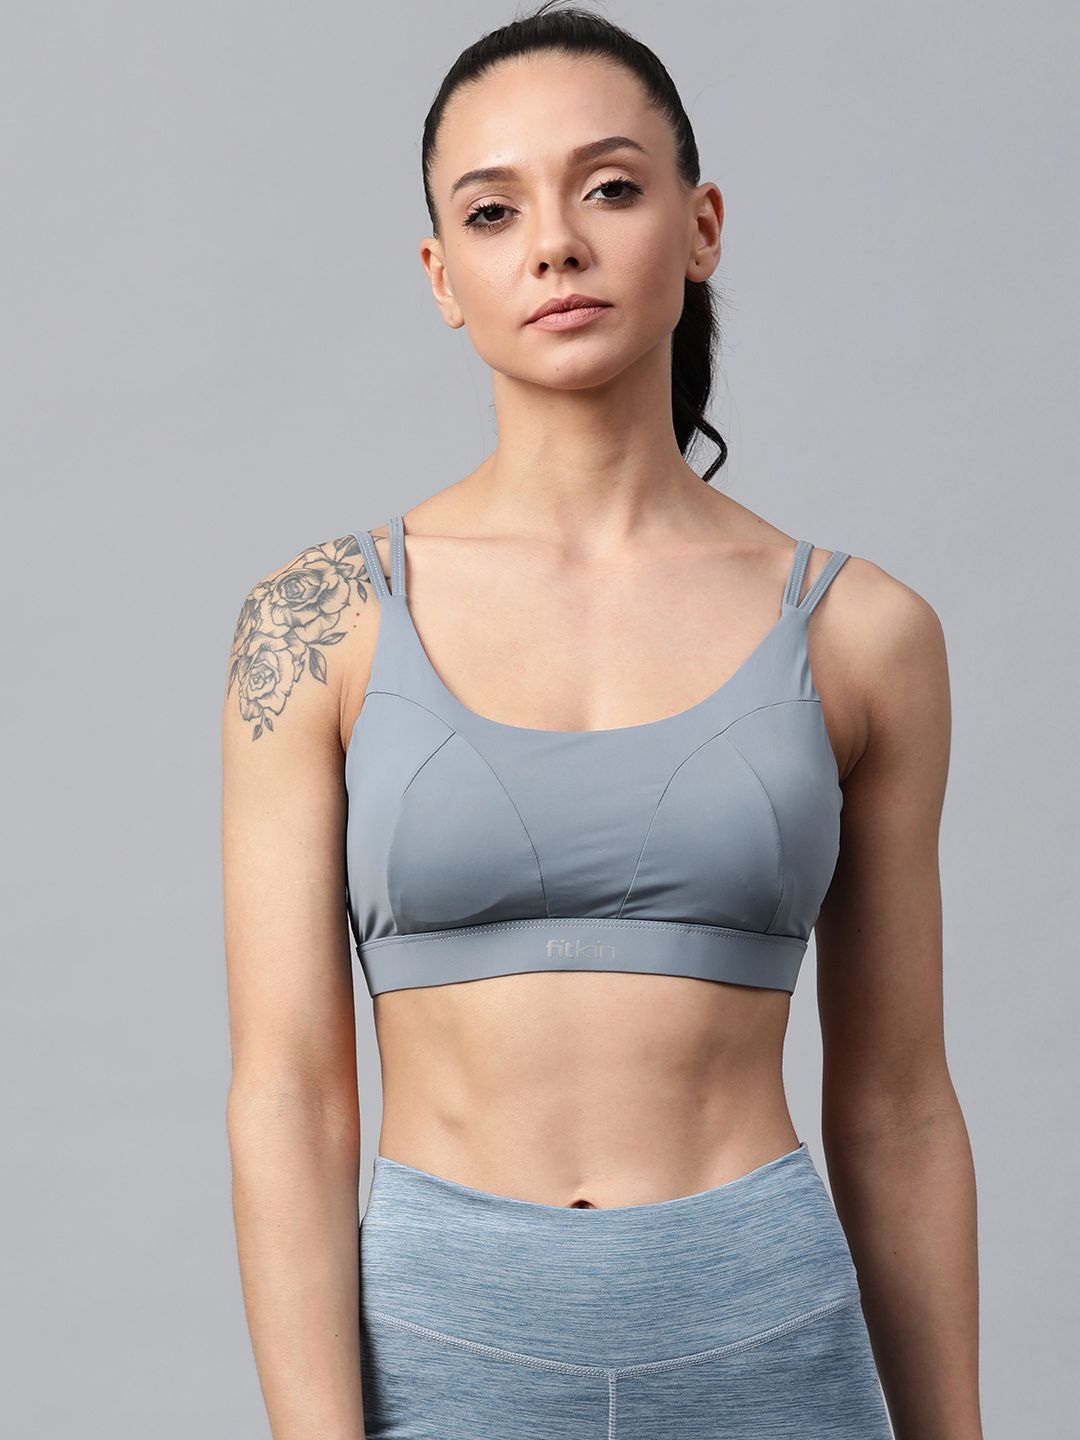 Fitkin Blue Solid Removable Padded Non-Wired Airlift Intrigue Sports Bra B27 Price in India